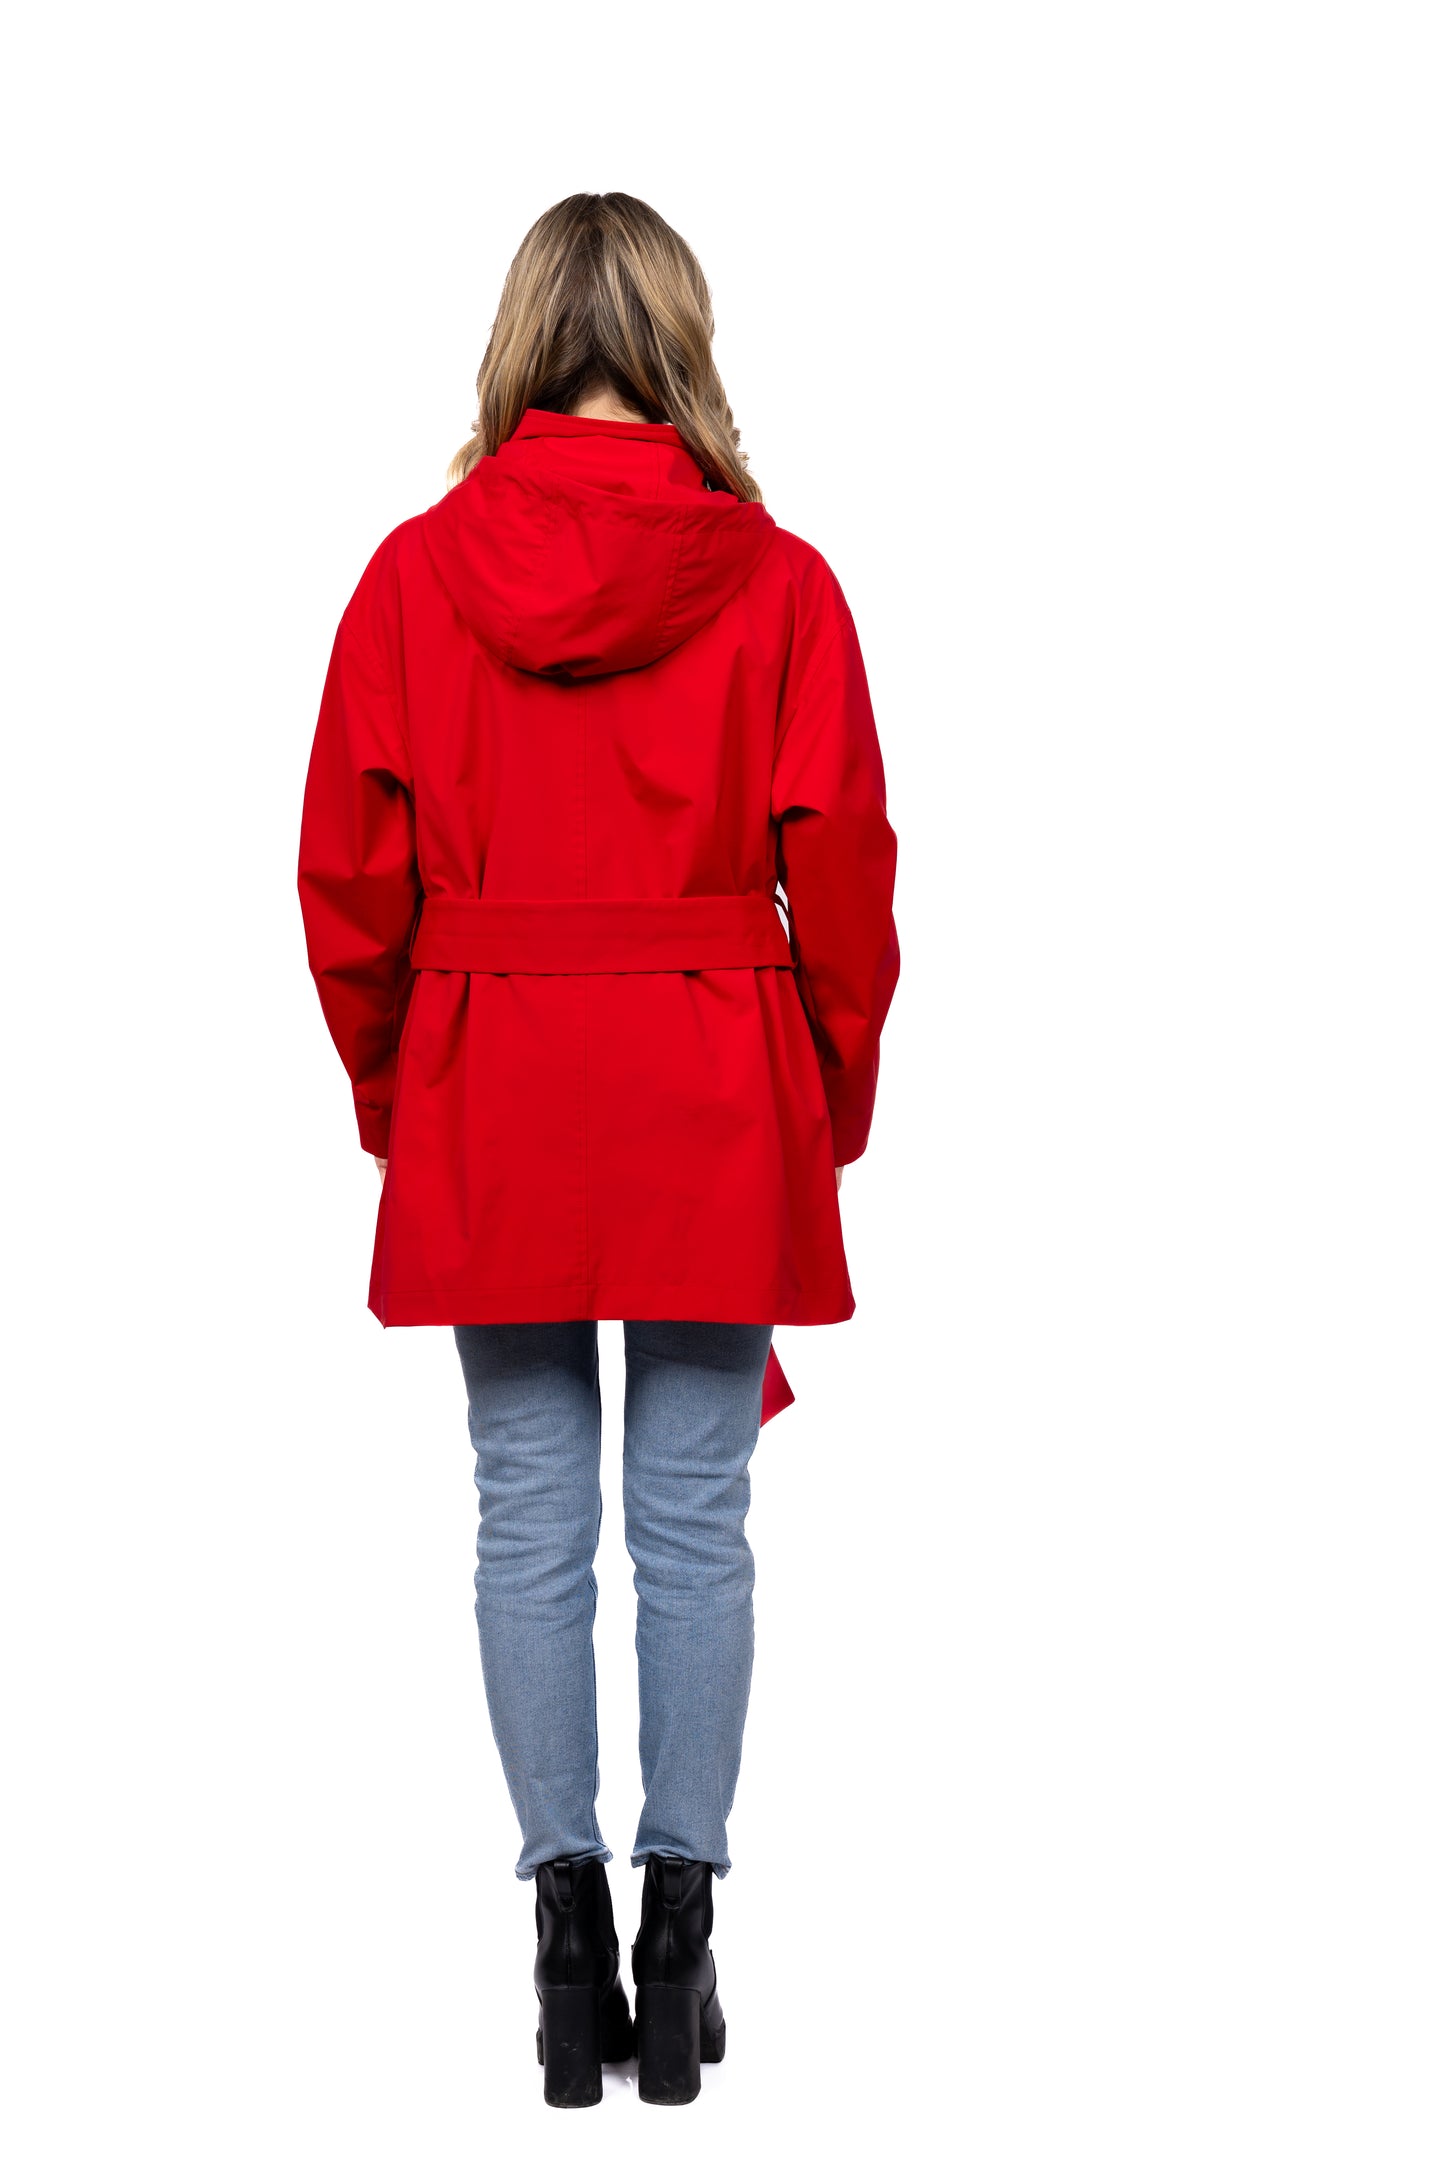 Desloups urban waterproof coat with hood, loose with belt for women - Red 